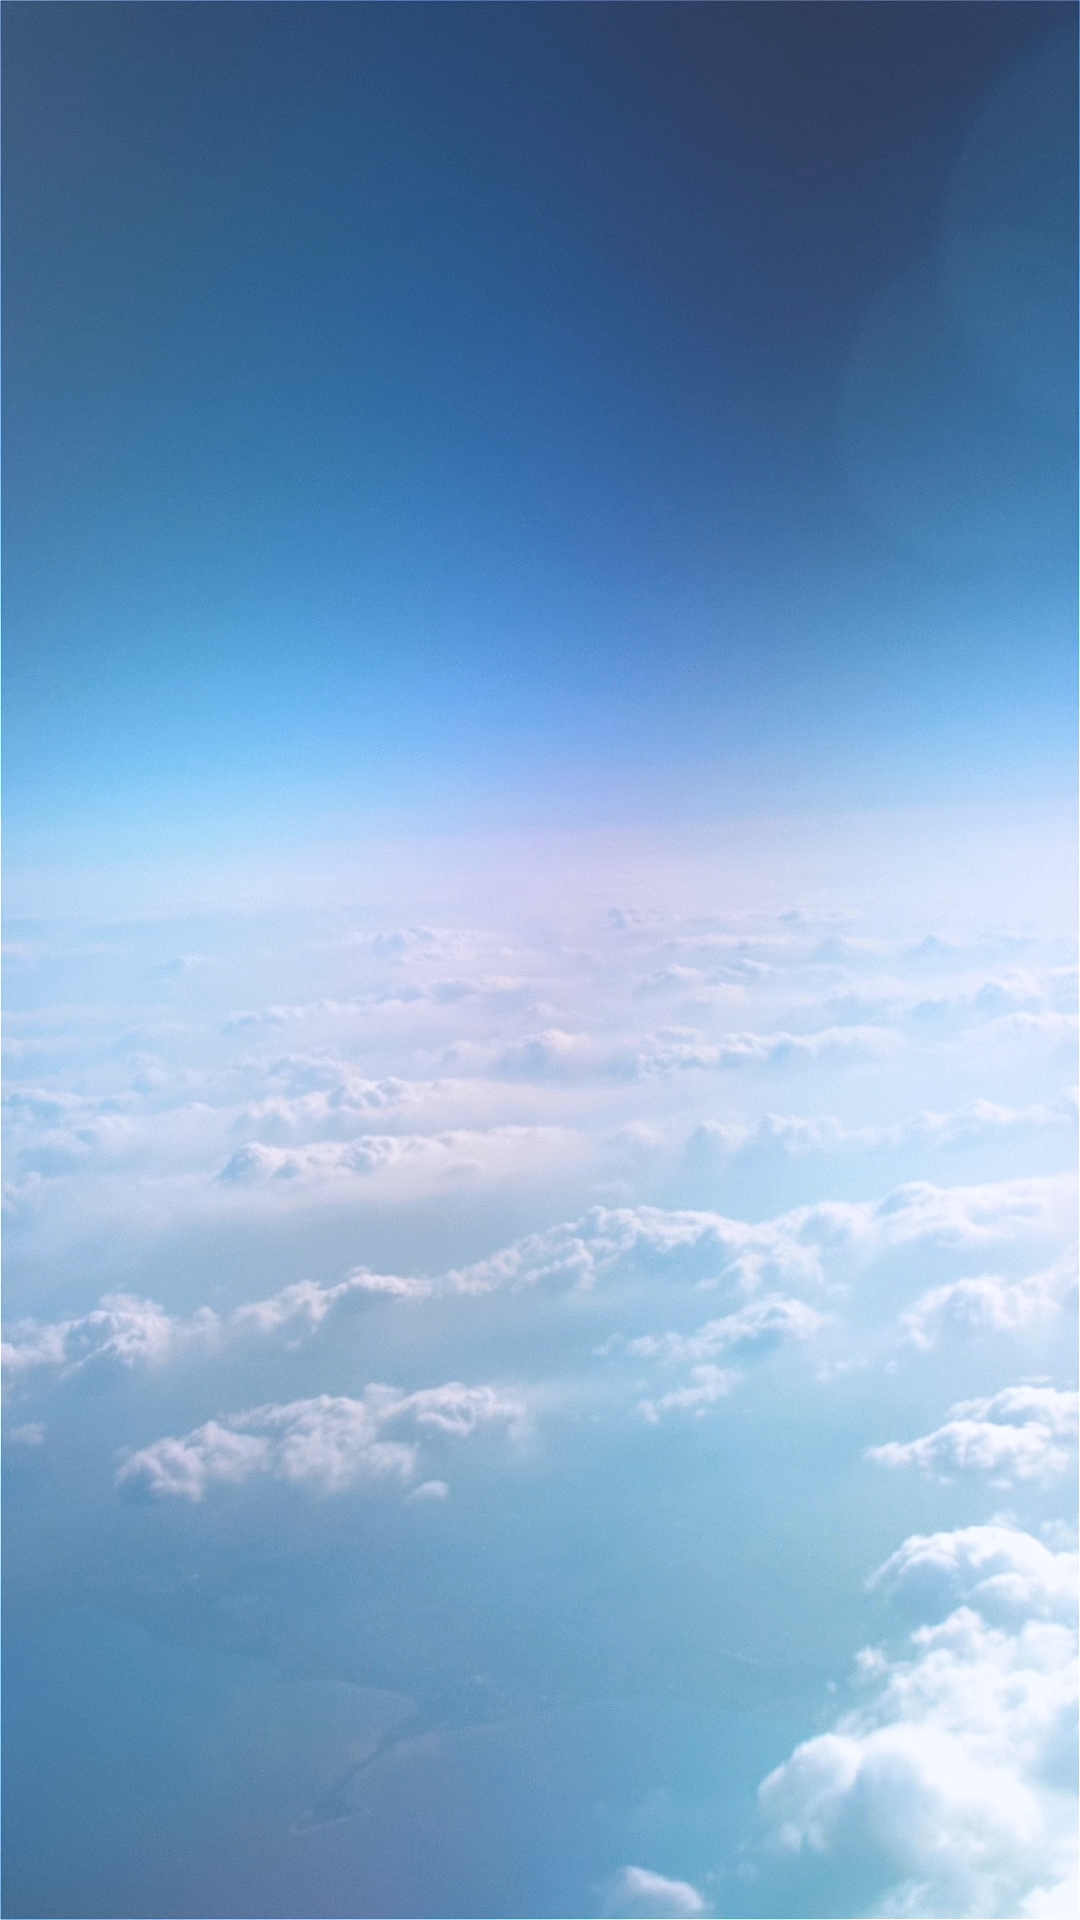 View Of The Sky From An Airplane. - View Of The Sky From An Airplane. -   beauty Pictures of the sky